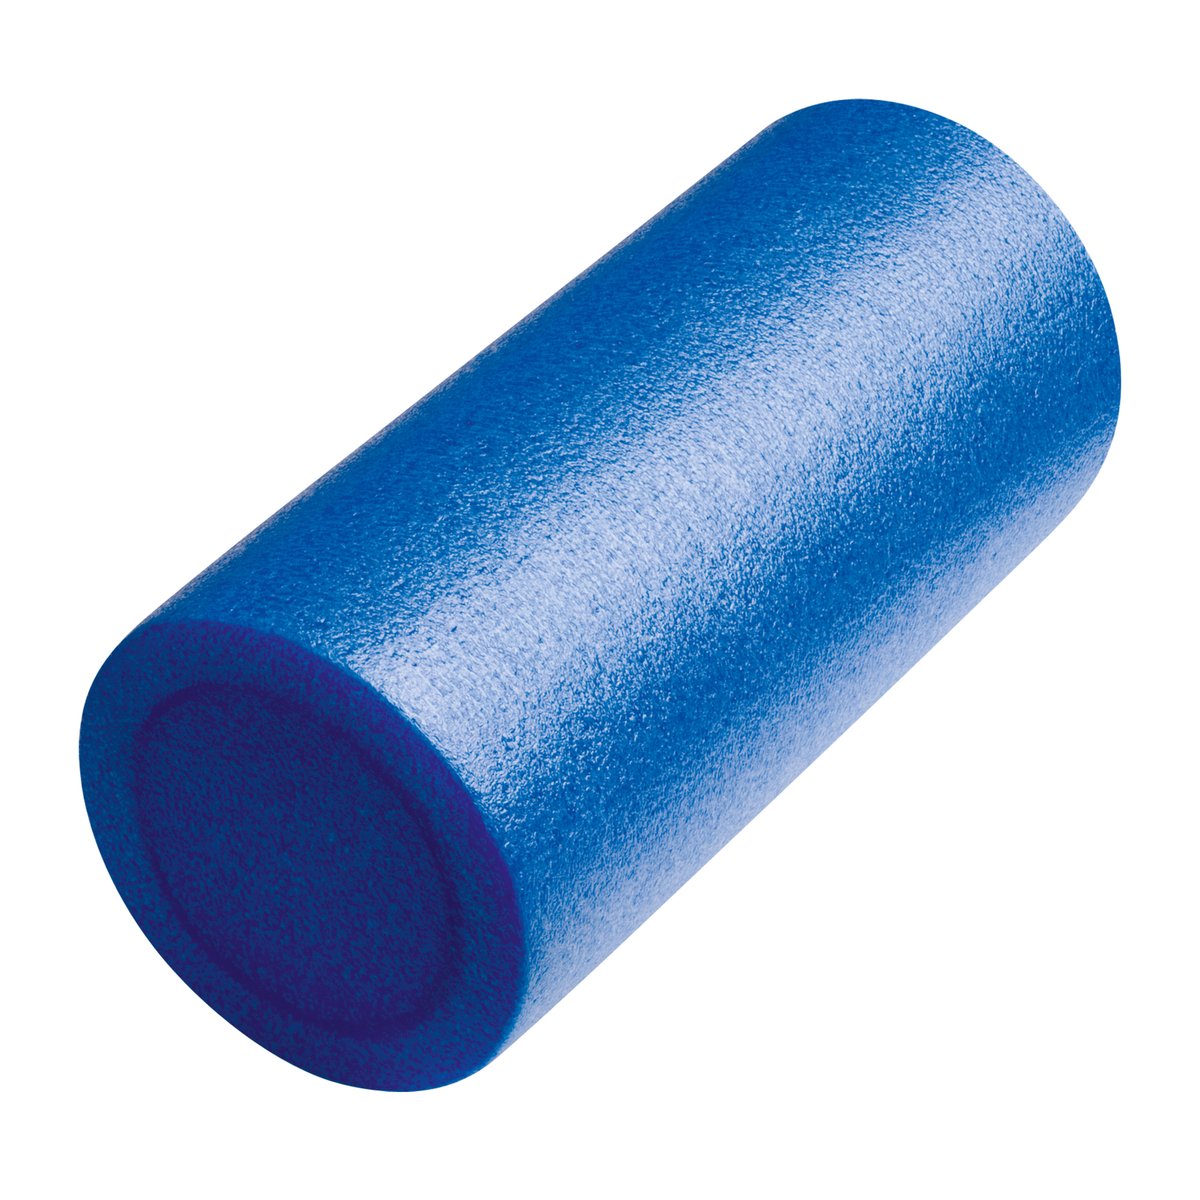 Yoga & Pilates roller REFLECTS-LOMINT blue